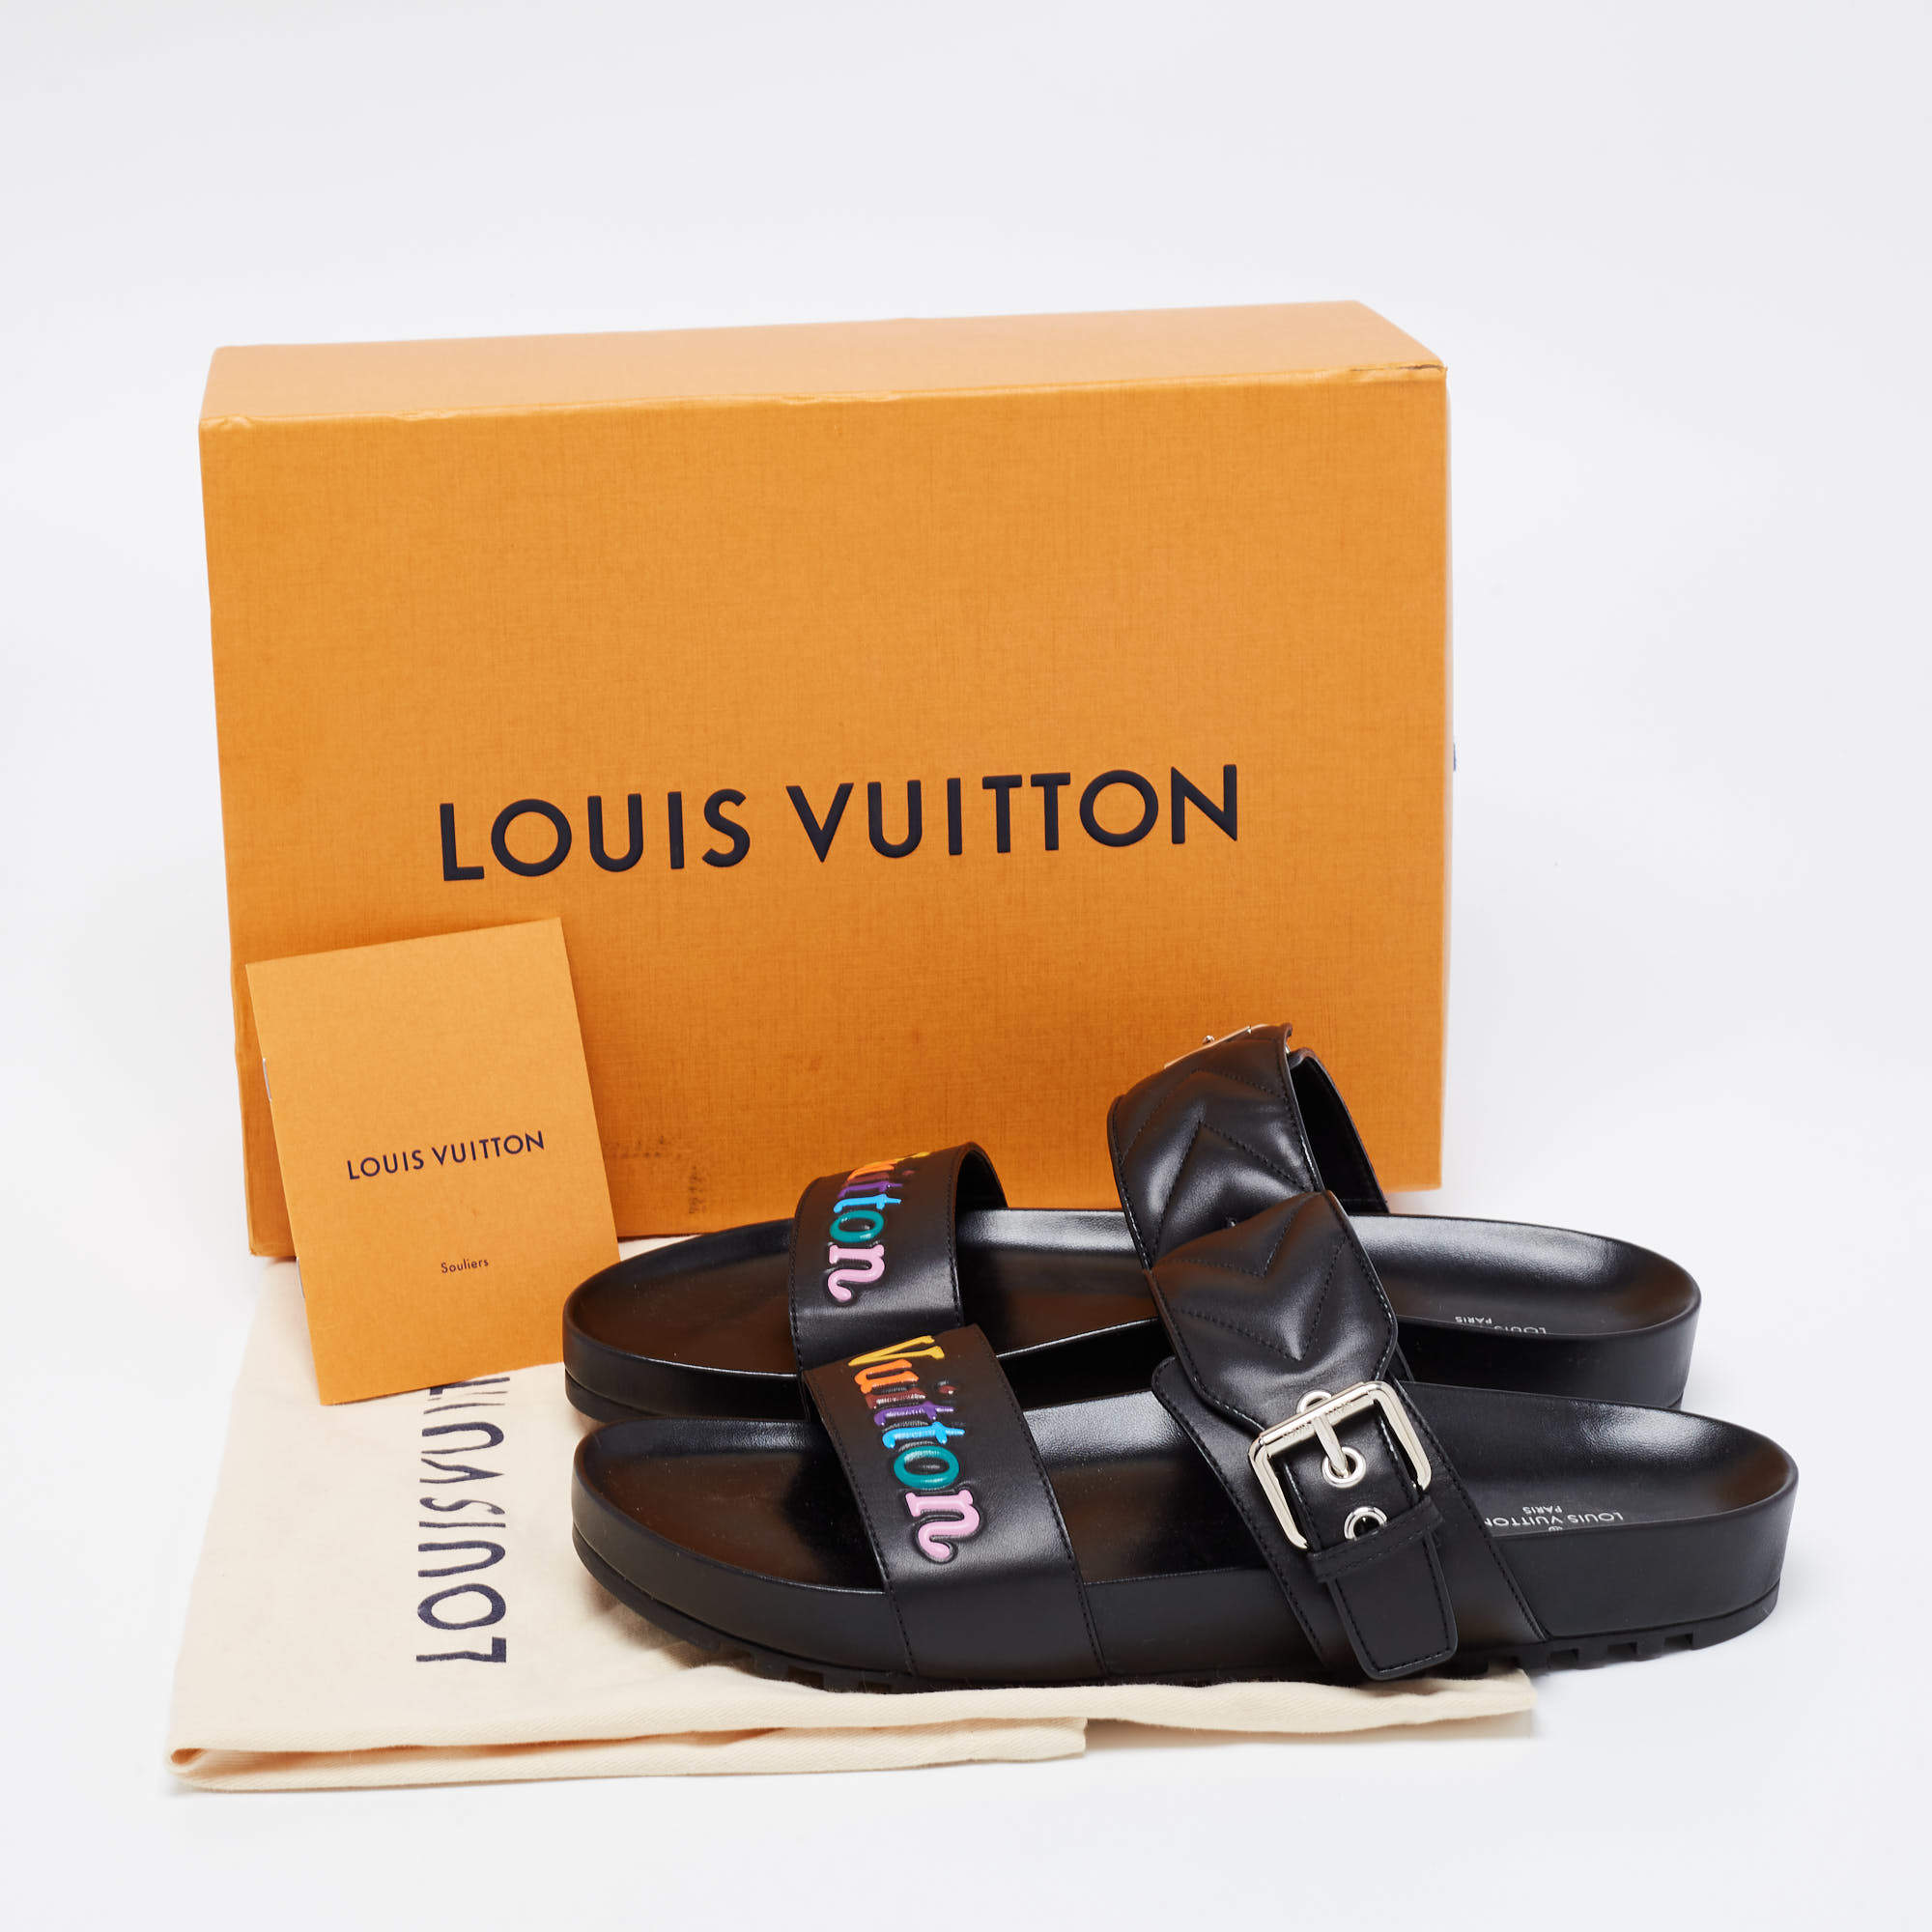 Bom dia patent leather sandal Louis Vuitton Black size 7 US in Patent  leather - 35611587